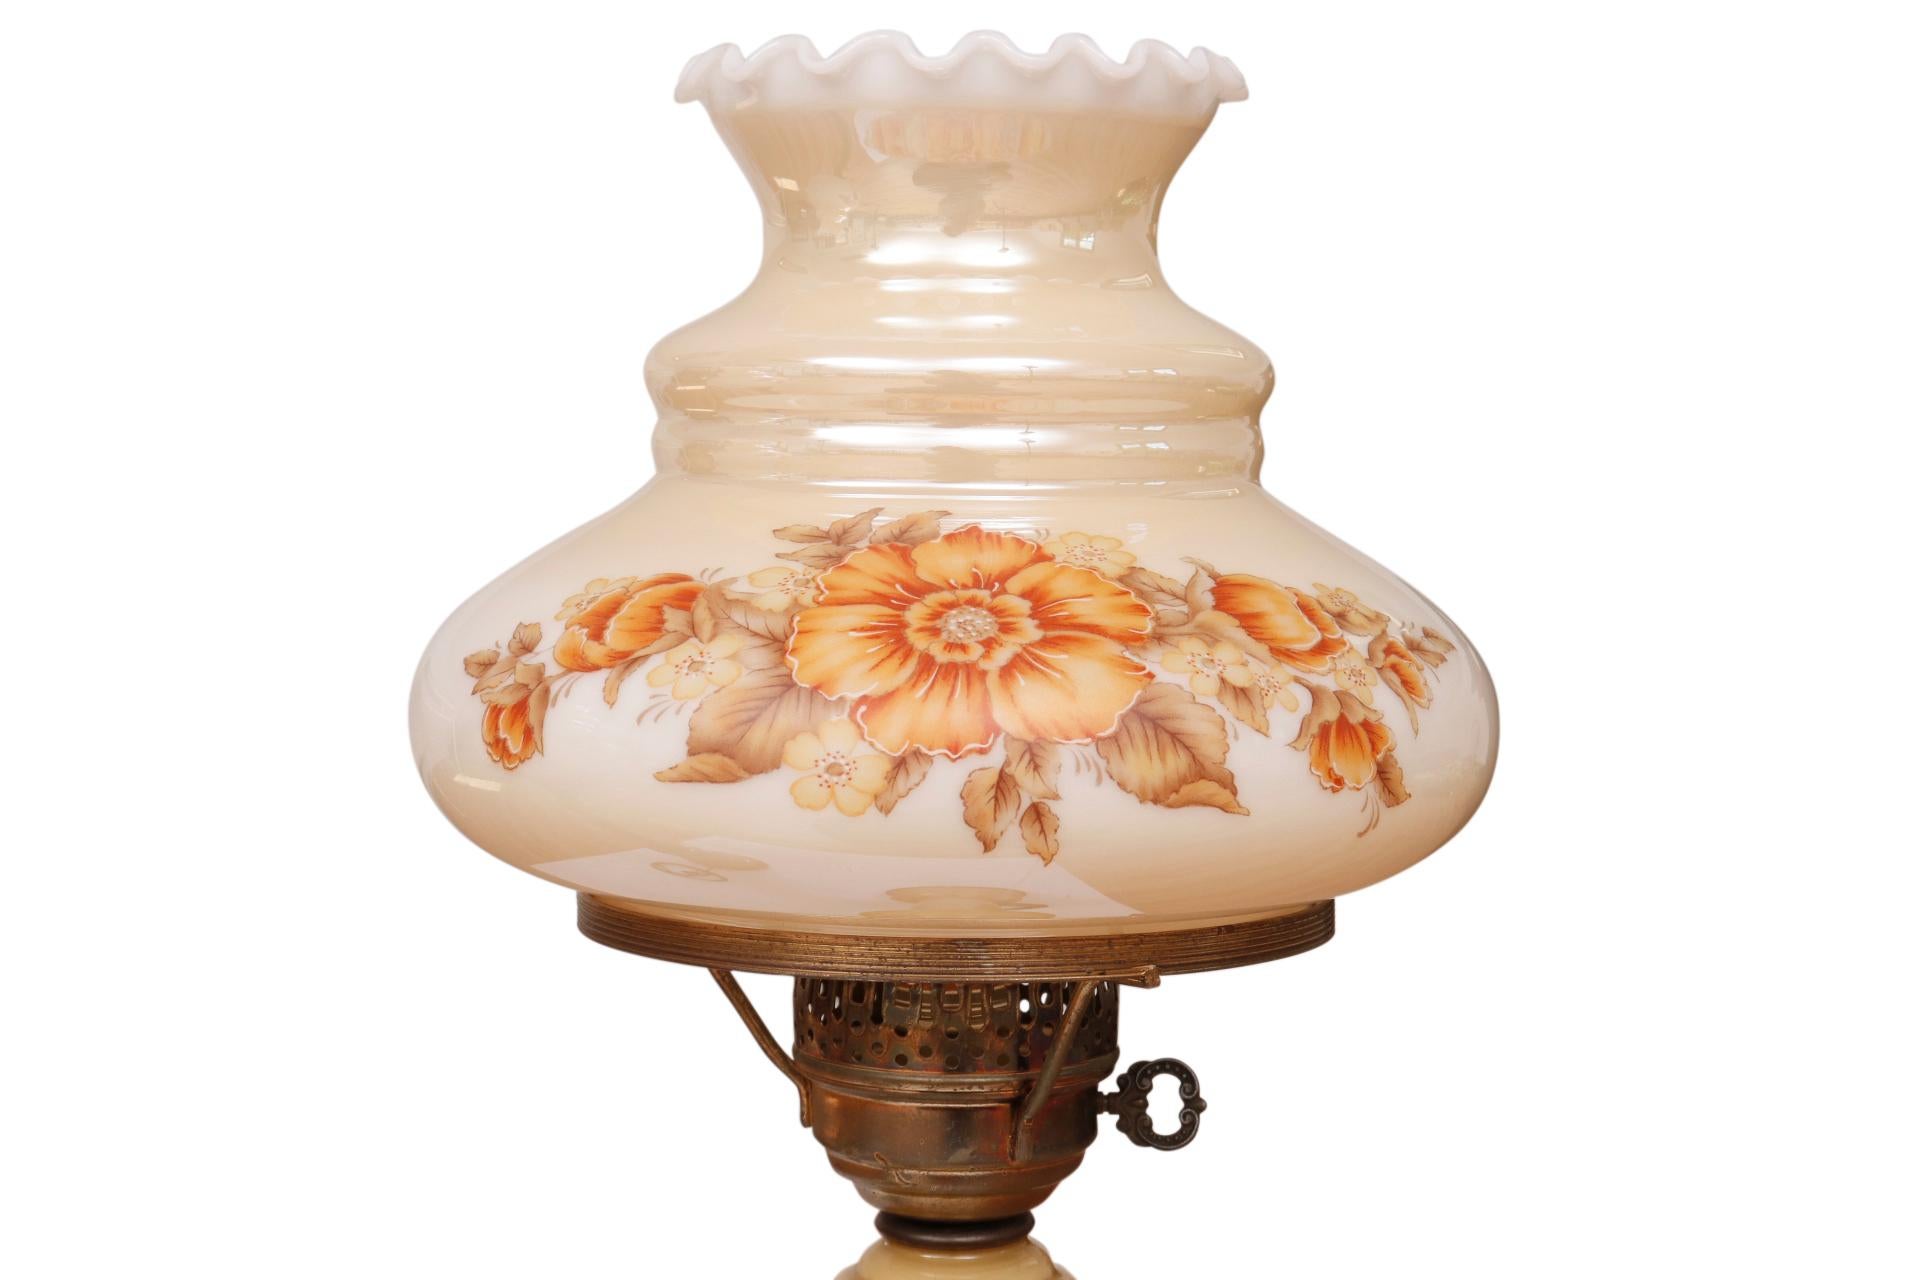 A pair of traditional table lamps made of glass, painted on the interior in a soft caramel color. Glass shades called Tam-o-Shanters, named after the Scottish bonnet worn by men, are painted with a floral motif in orange tones. Each lamp measures